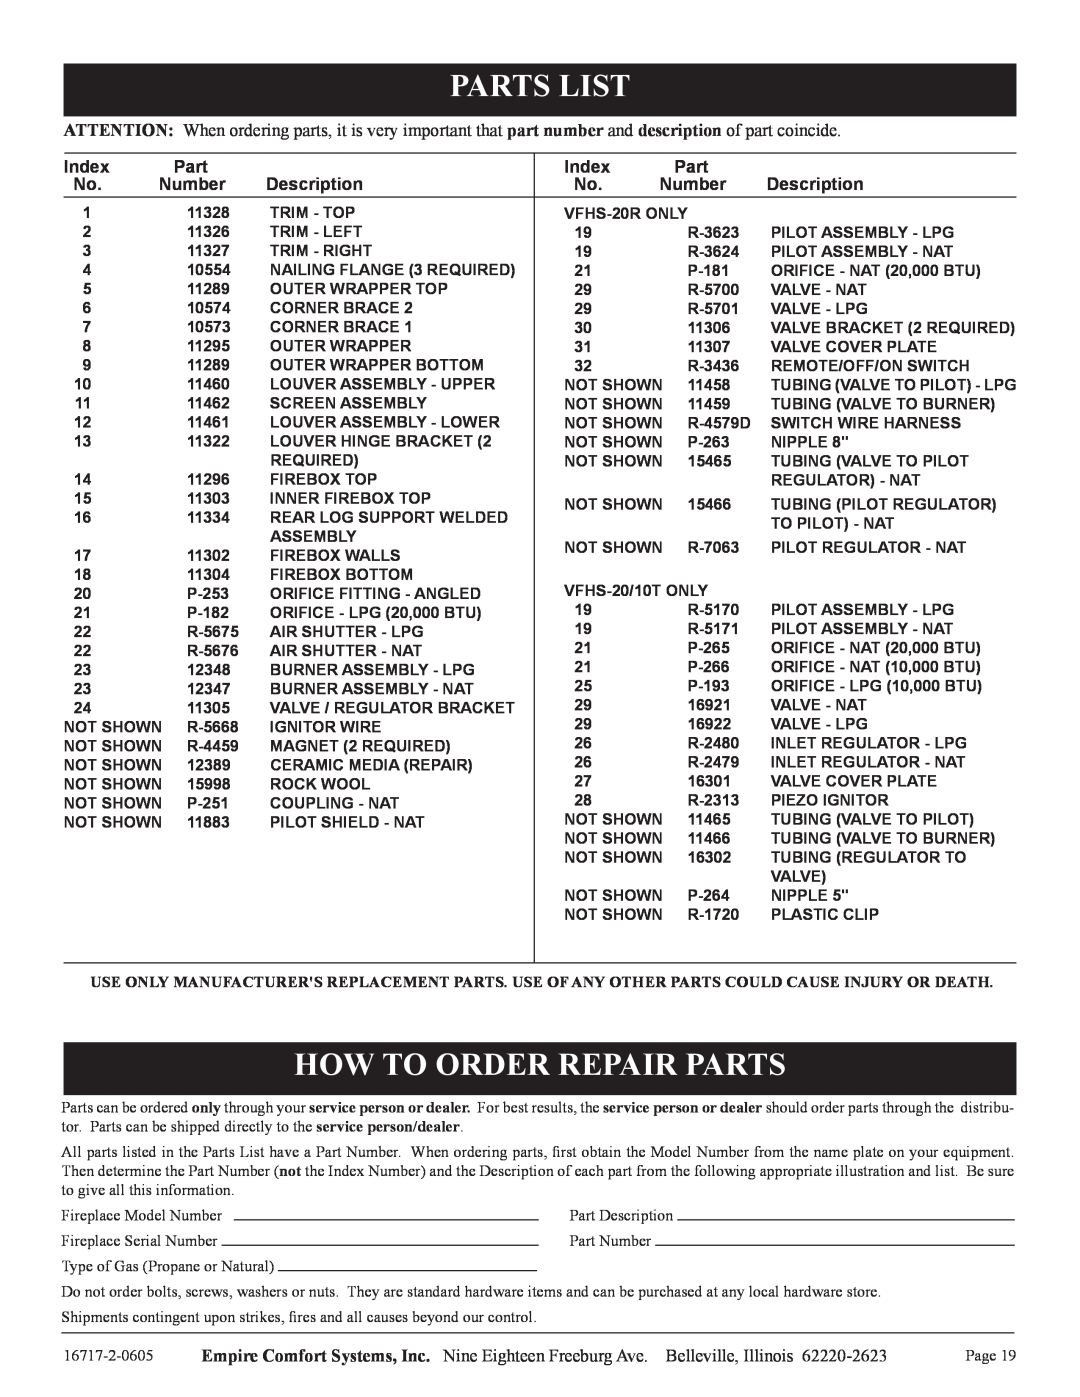 Empire Comfort Systems VFHS-20/10T-4, VFHS-20R-4 Parts List, How To Order Repair Parts, Index, Description, Number 